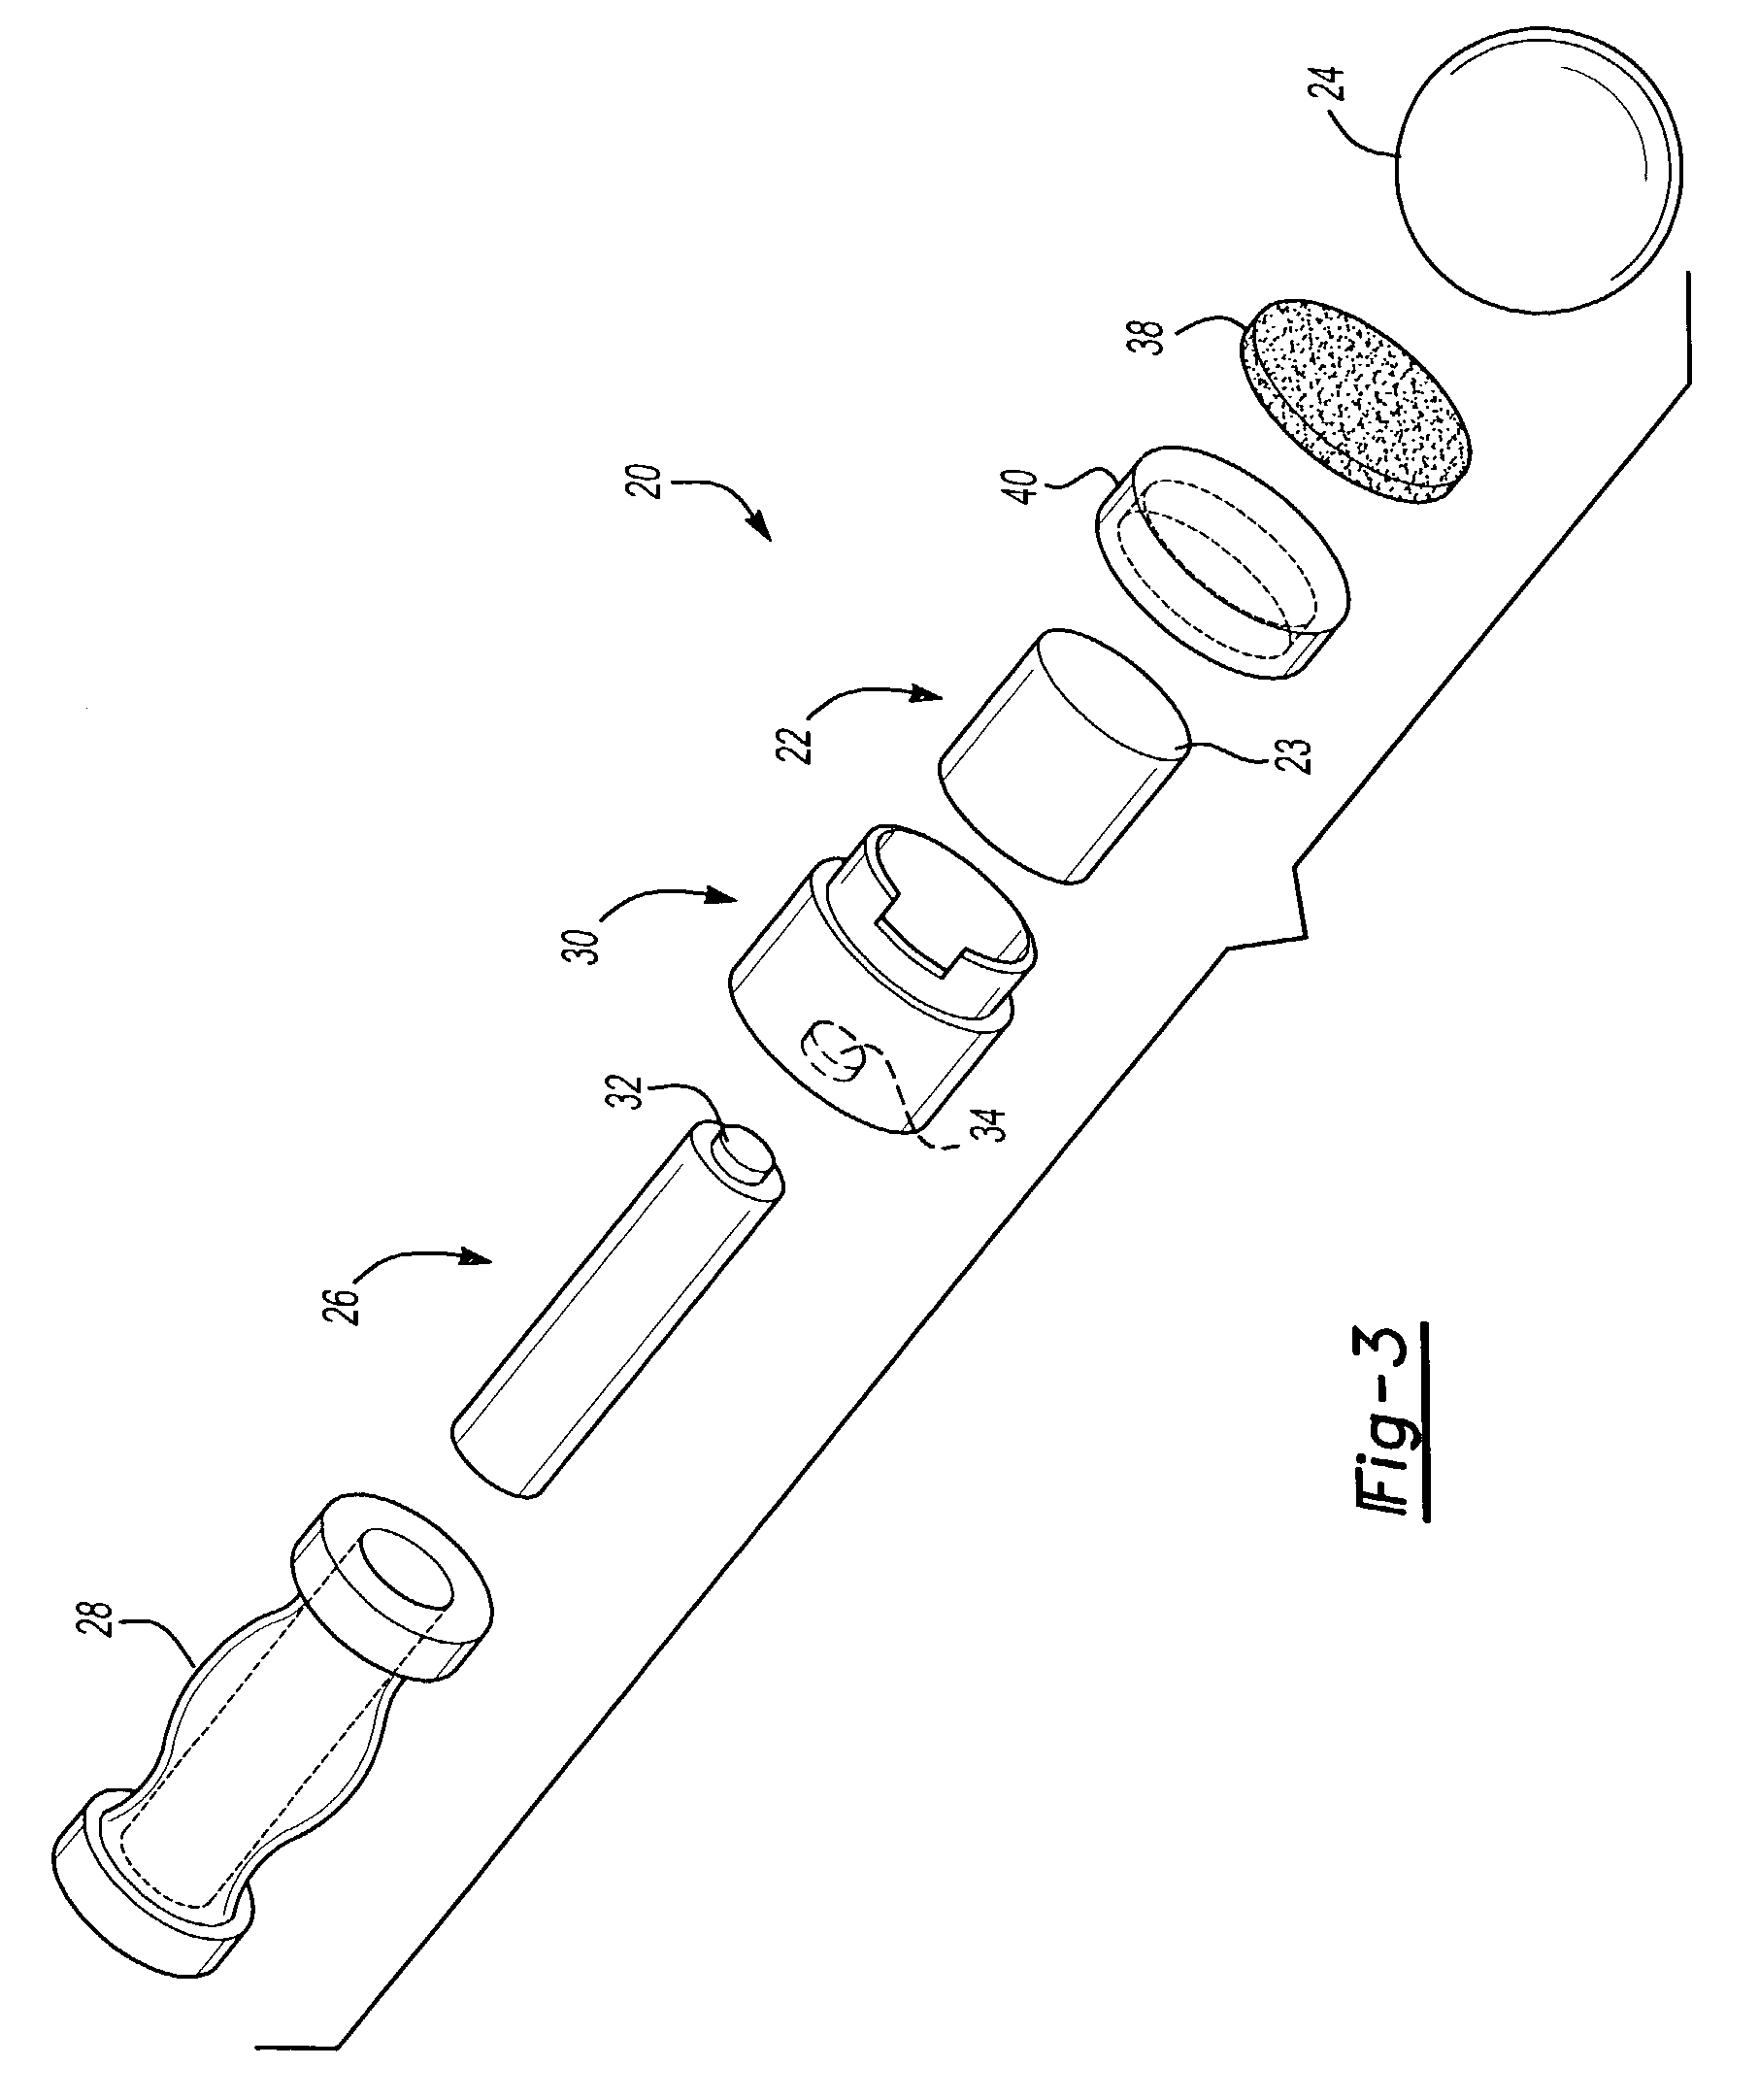 Magnetic dent removal device, method and kit